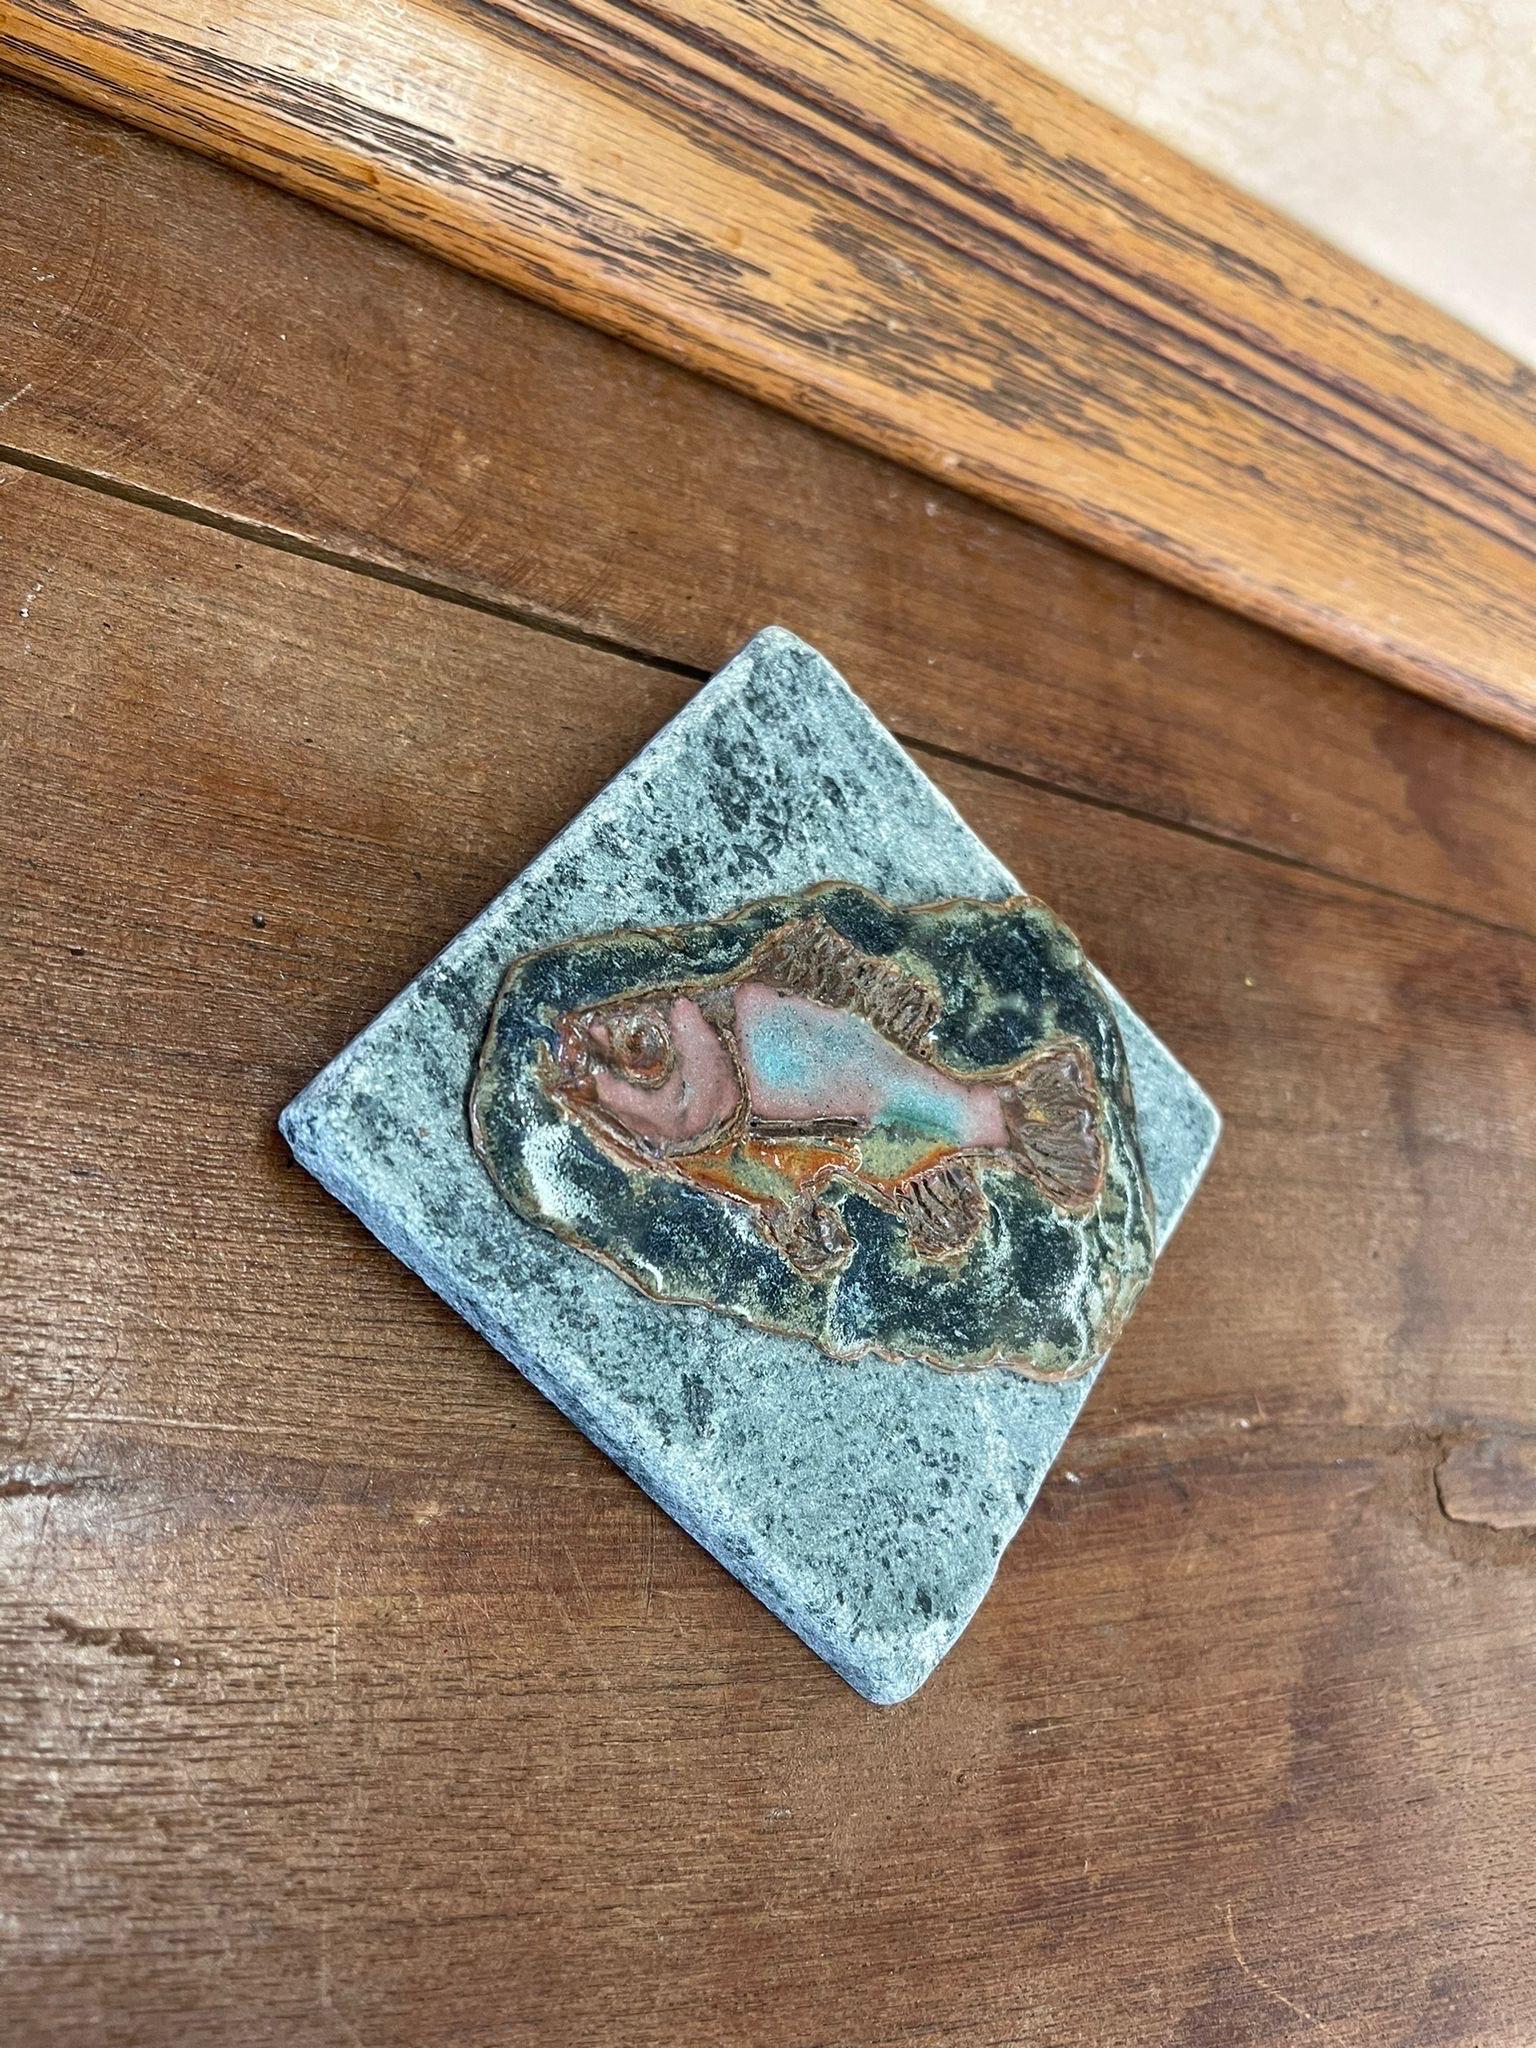 Vintage Tile Decorative Wall Art With Fish Motif. In Good Condition For Sale In Seattle, WA